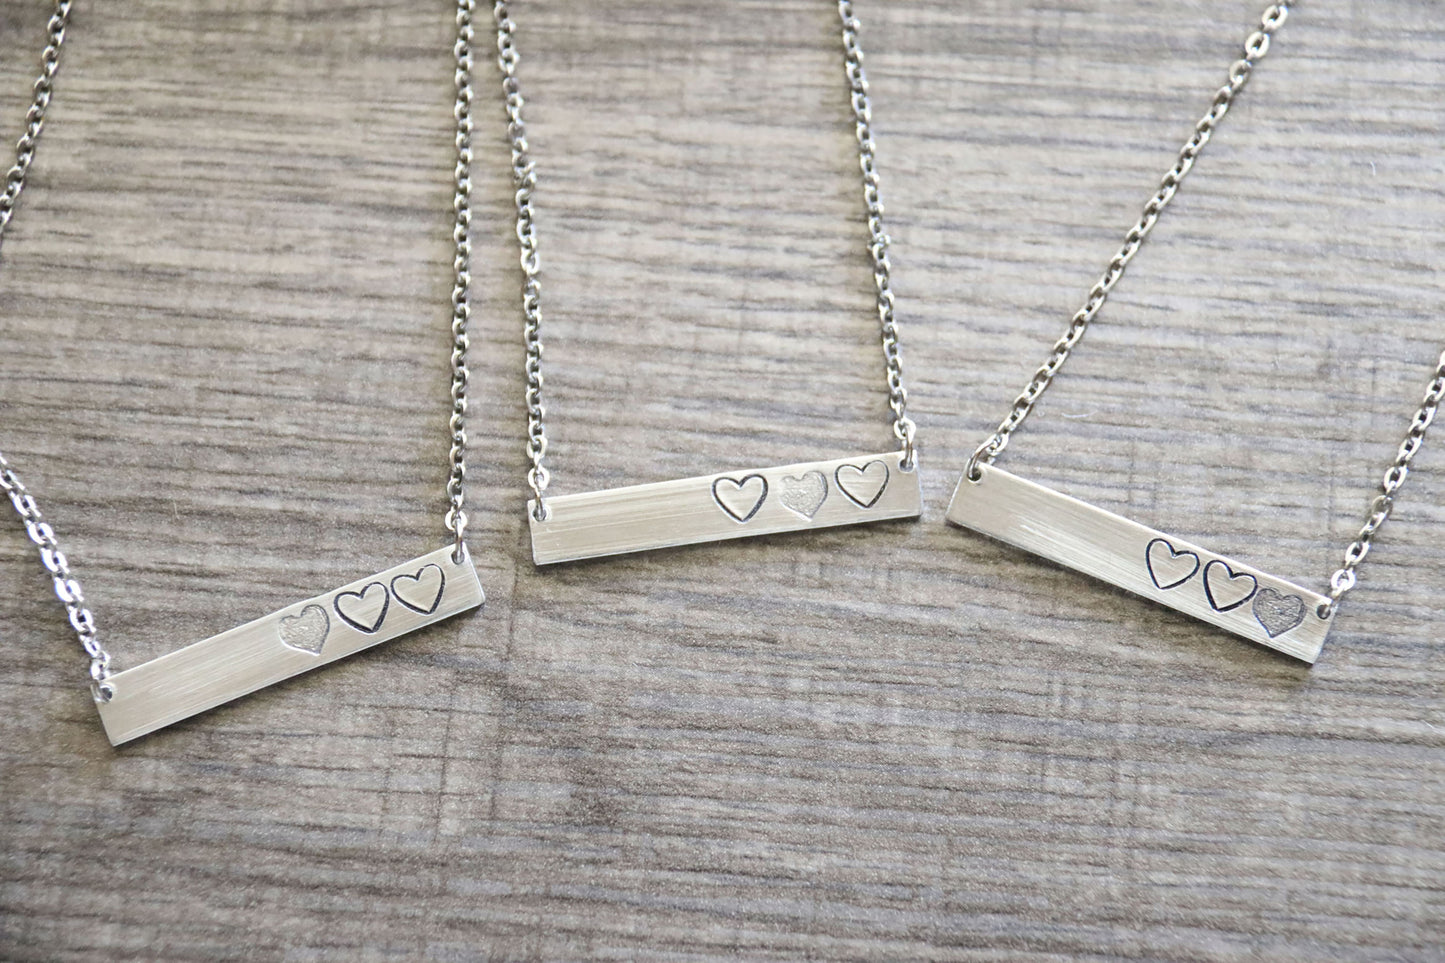 Sister Bar Necklaces Hand Stamped Set of 3 Necklaces Heart Shape